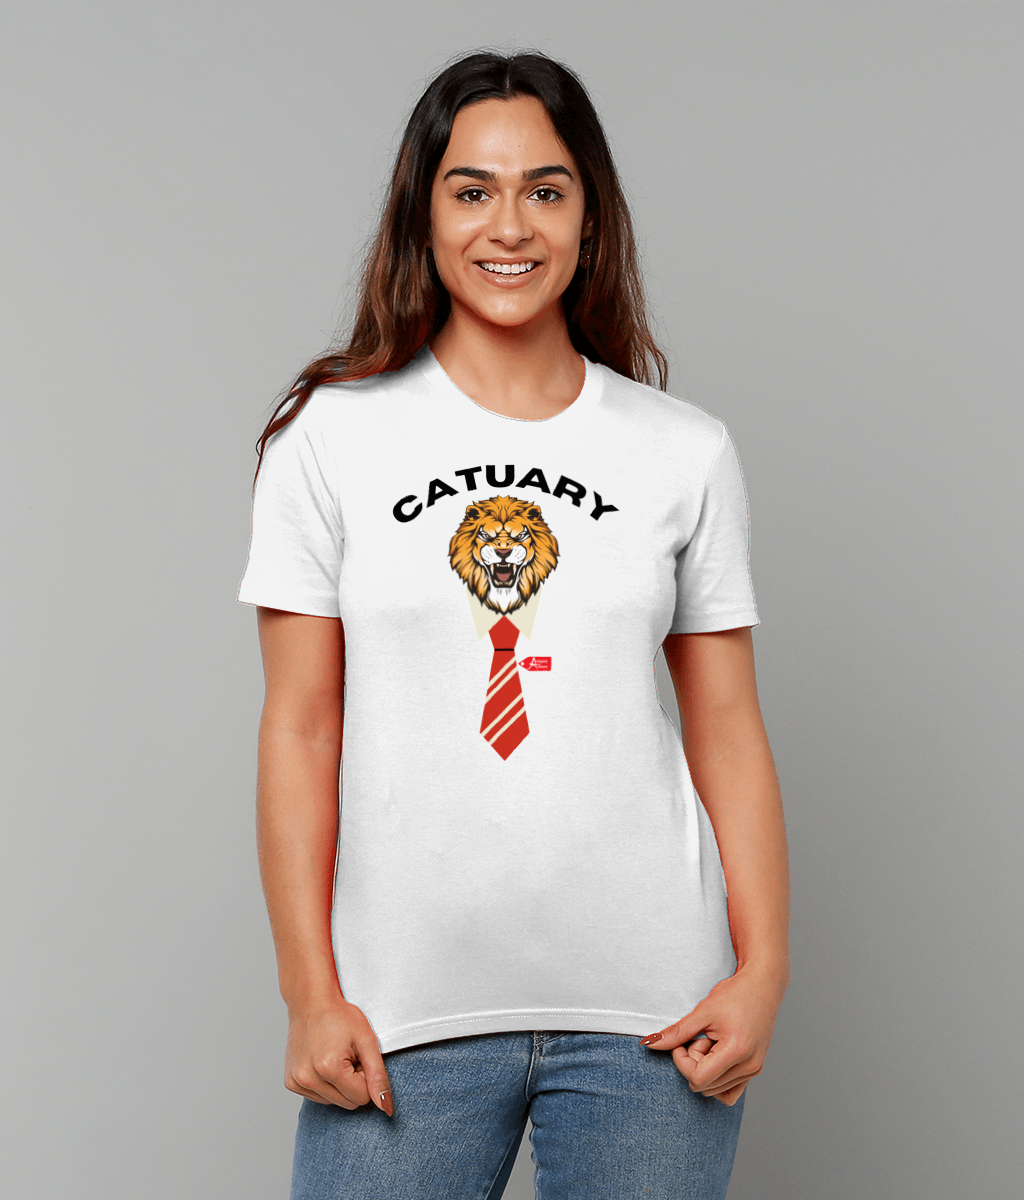 Catuary Lion in Tie T-Shirt